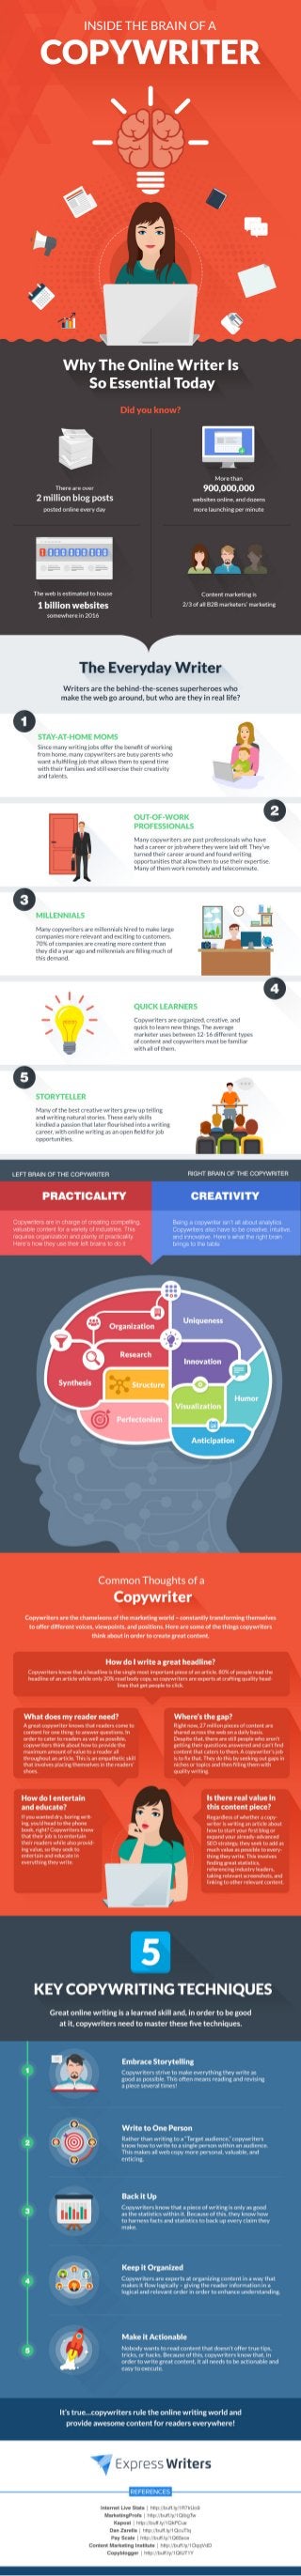 Inside The Brain & Life of a Copywriter (Infographic)